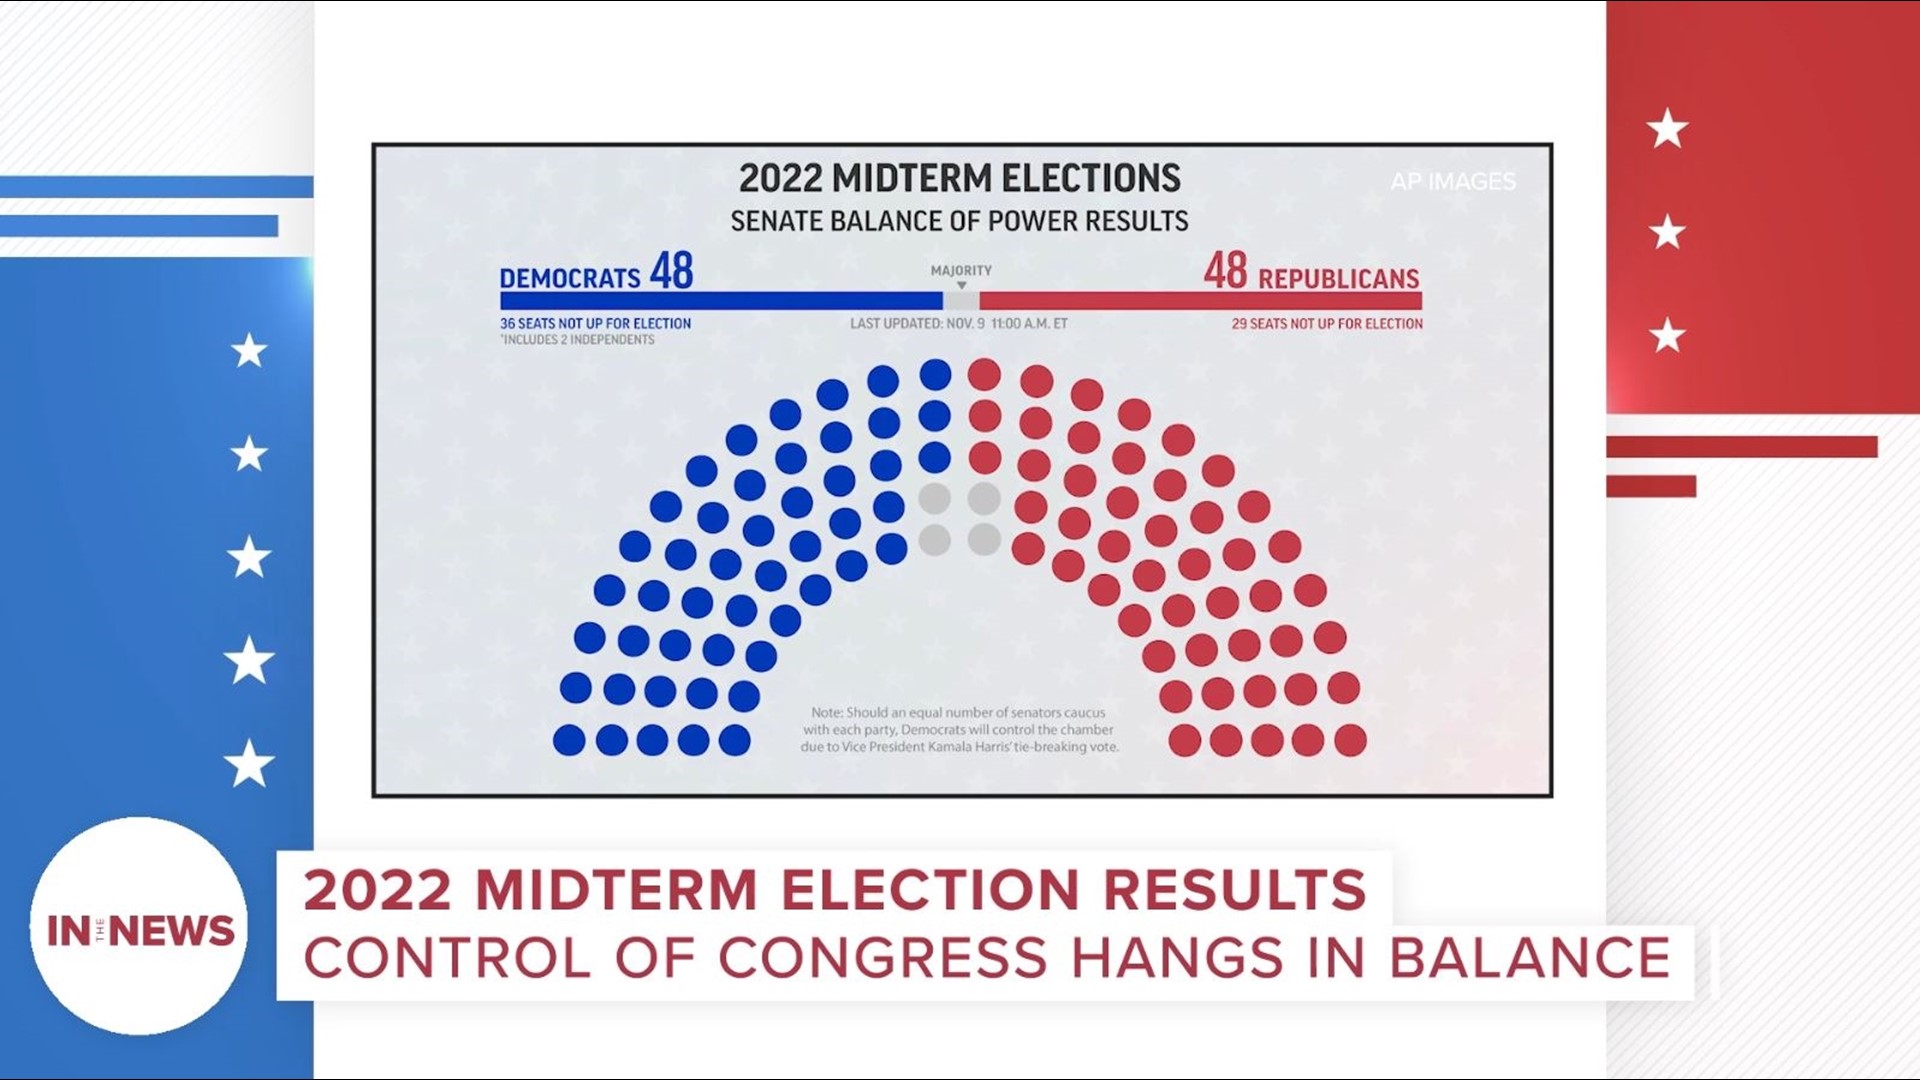 A look at what big national races have been called across the US in the 2022 midterm elections from Senate seats to Governor races.